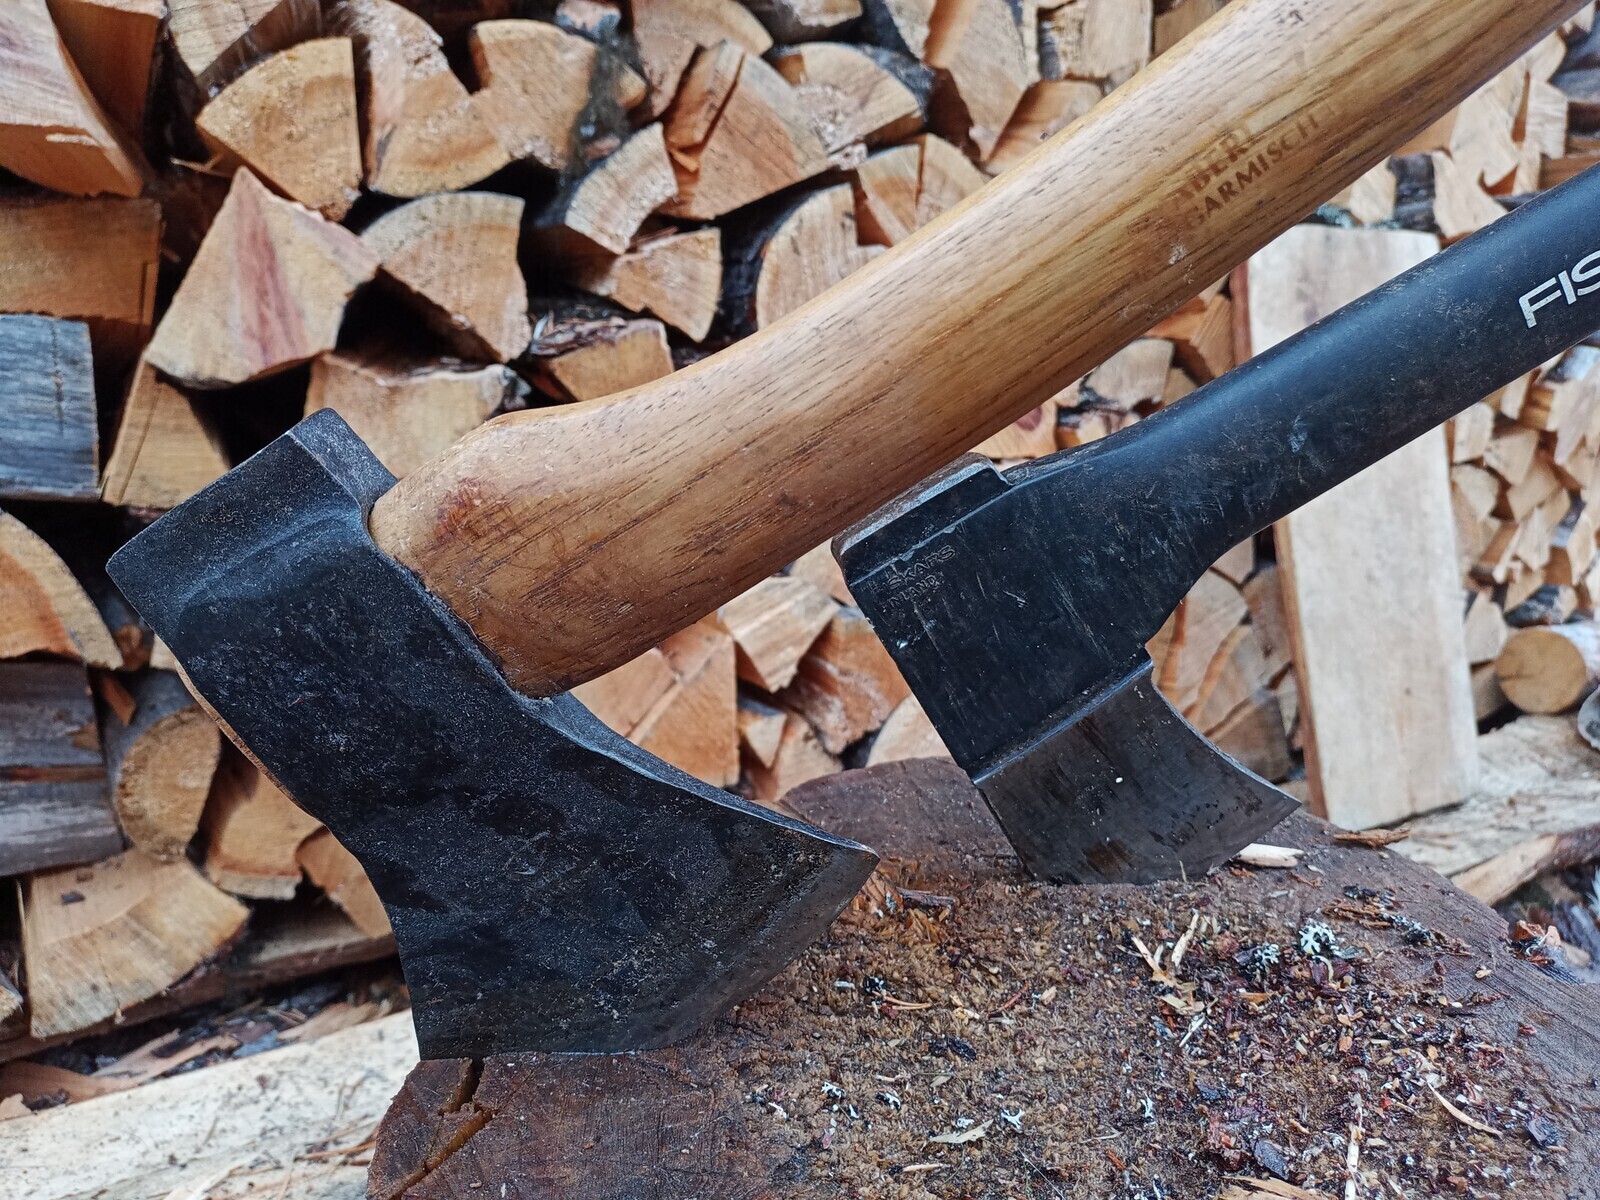 repairing and improving wooden axe handles